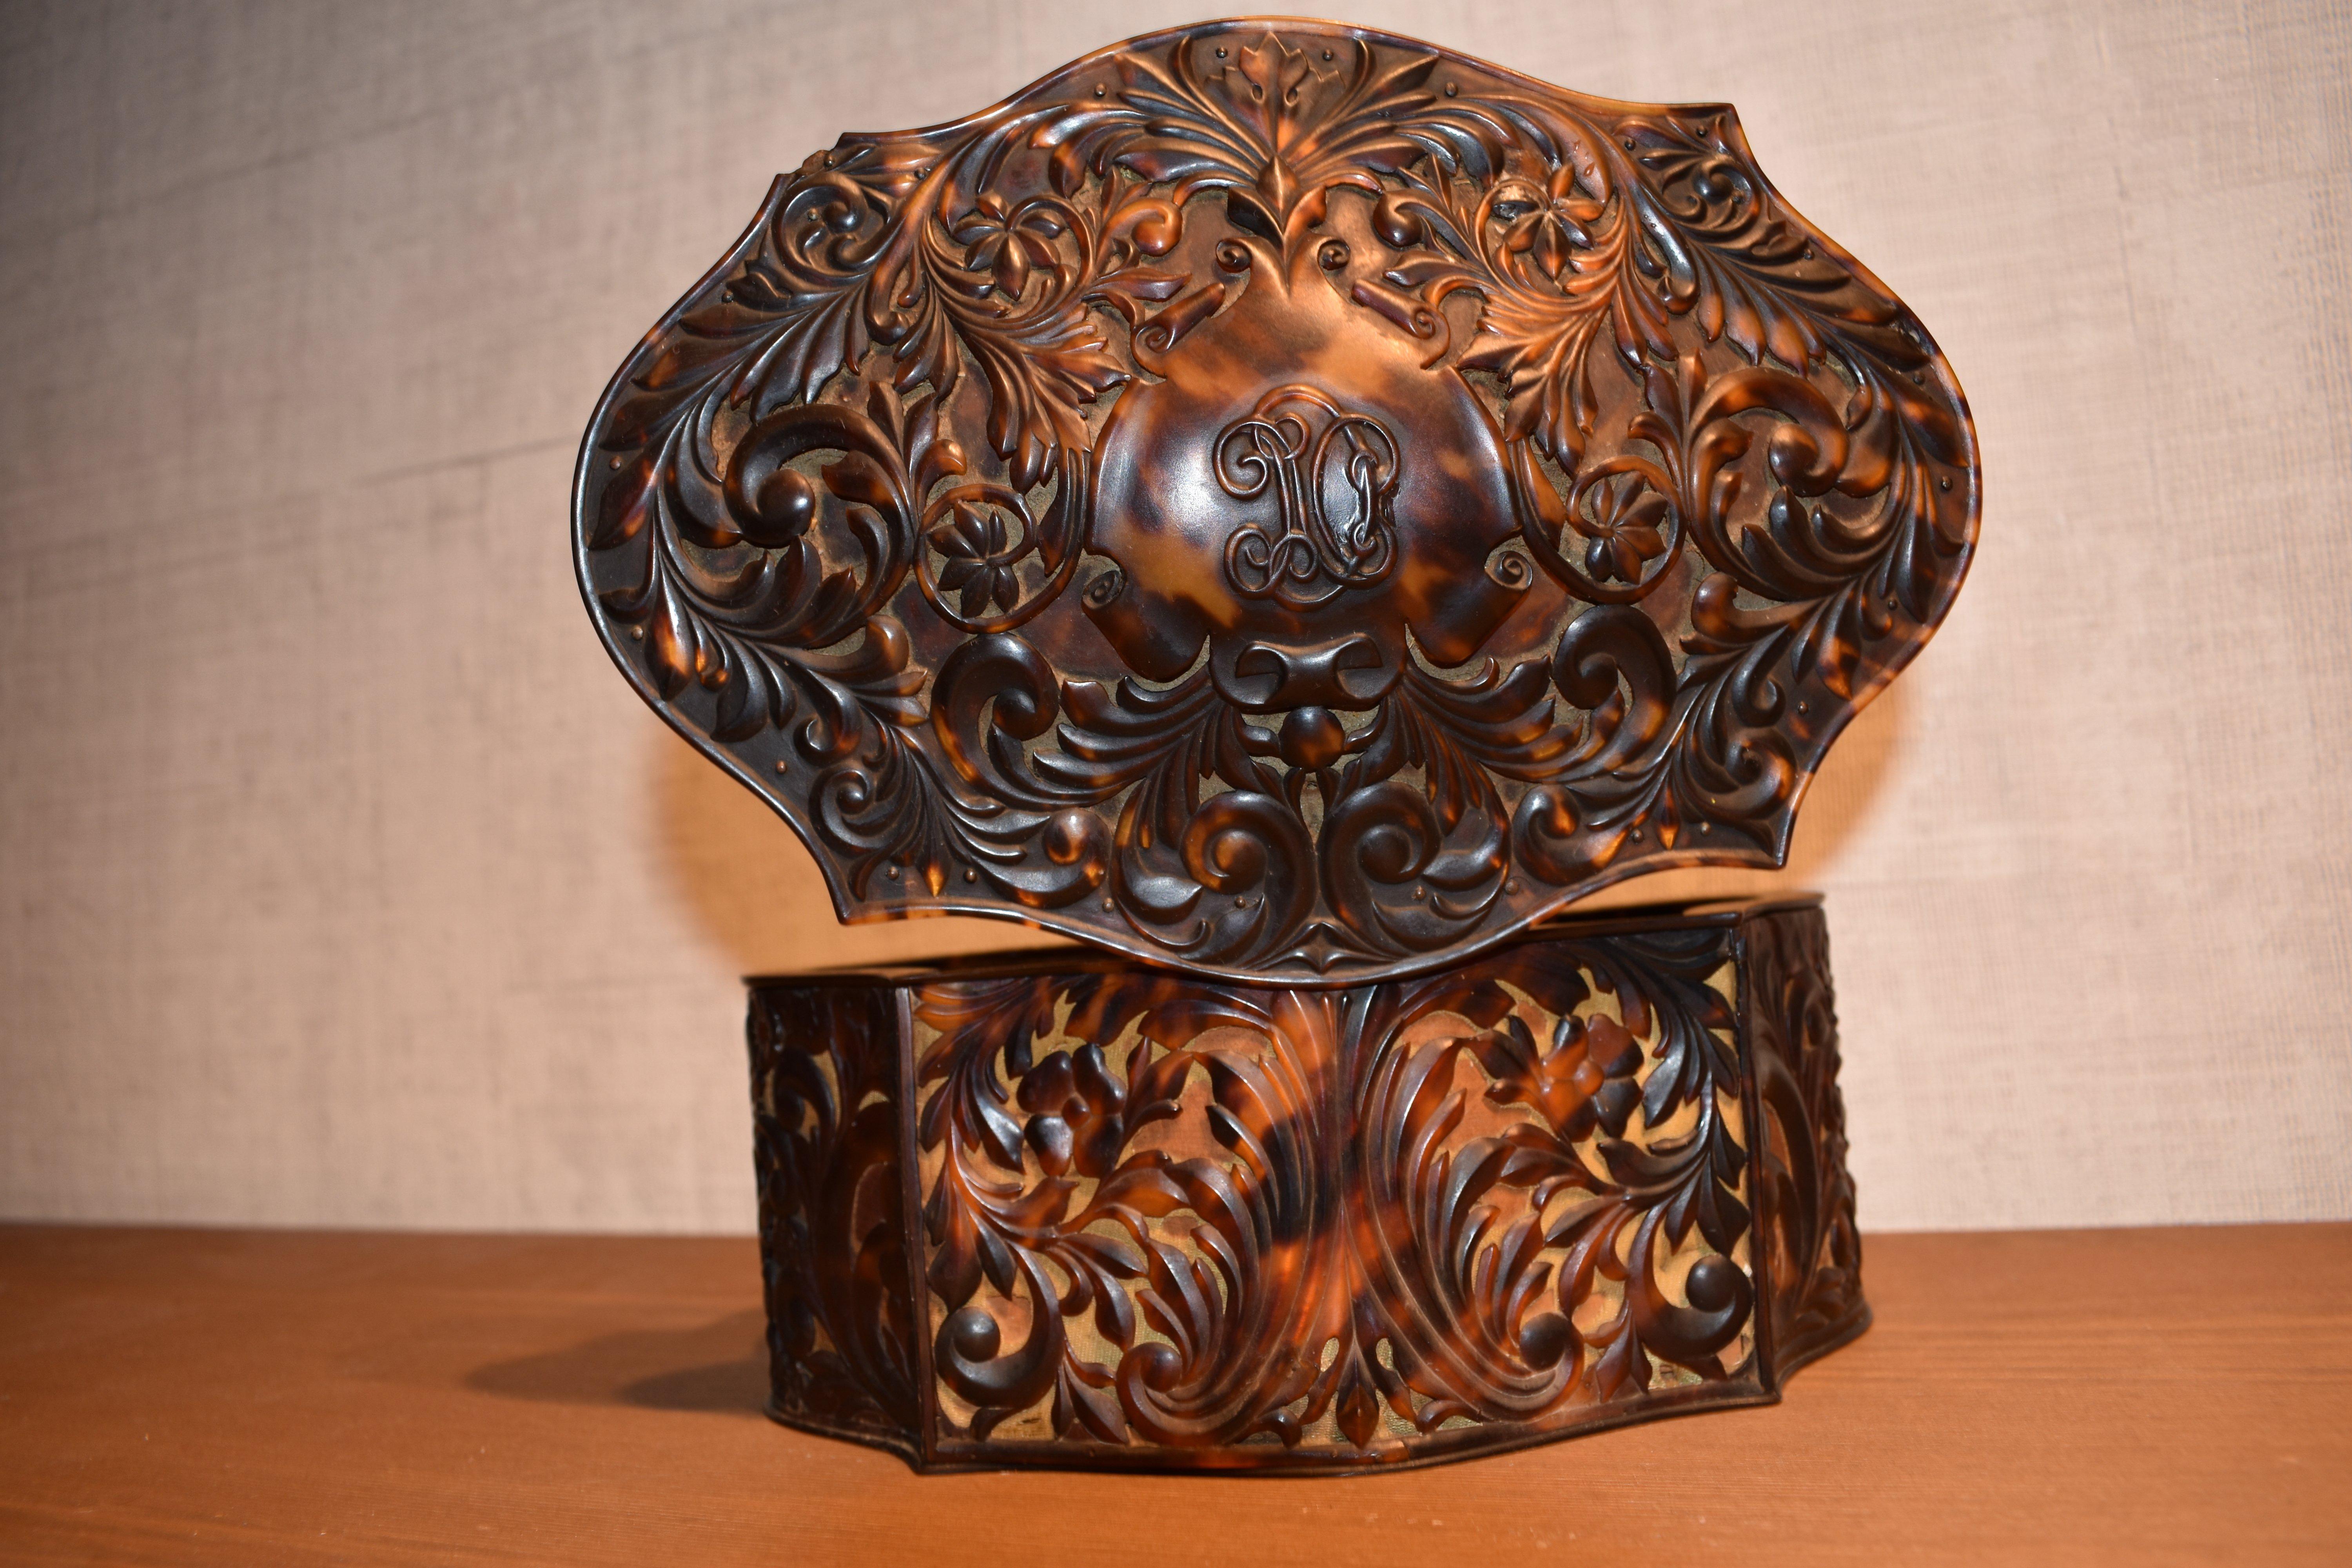 Information:
This impressive jewelry box is beautifully crafted. It is covered with carved plates of realistic looking faux tortoiseshell. The carvings are very detailed and sophisticated; in addition the box has a rare shape. The inside is lined